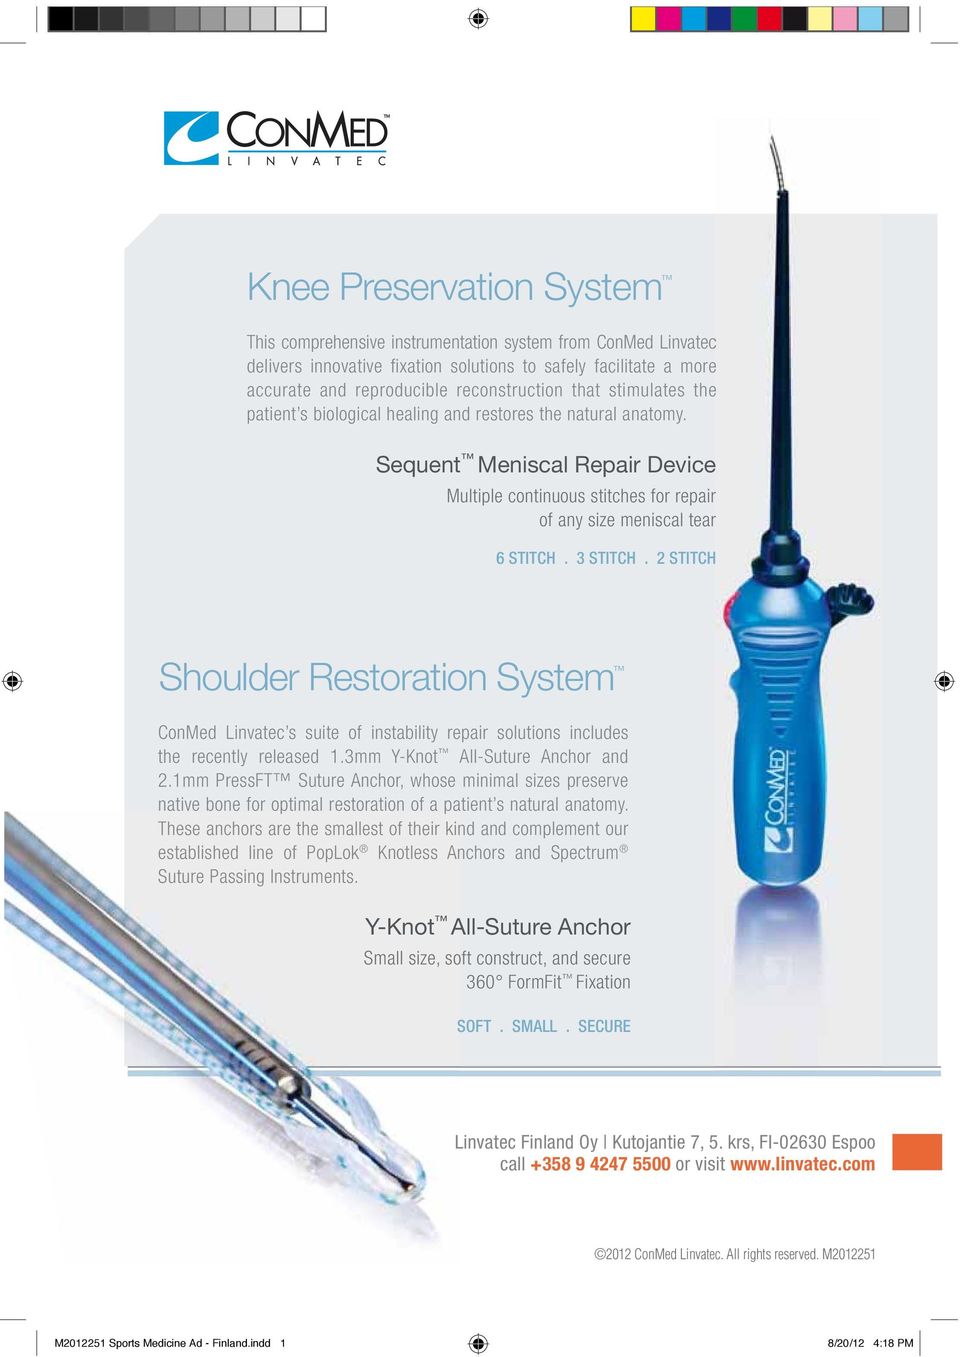 3 STITCH. 2 STITCH Shoulder Restoration System ConMed Linvatec s suite of instability repair solutions includes the recently released 1.3mm Y-Knot All-Suture Anchor and 2.